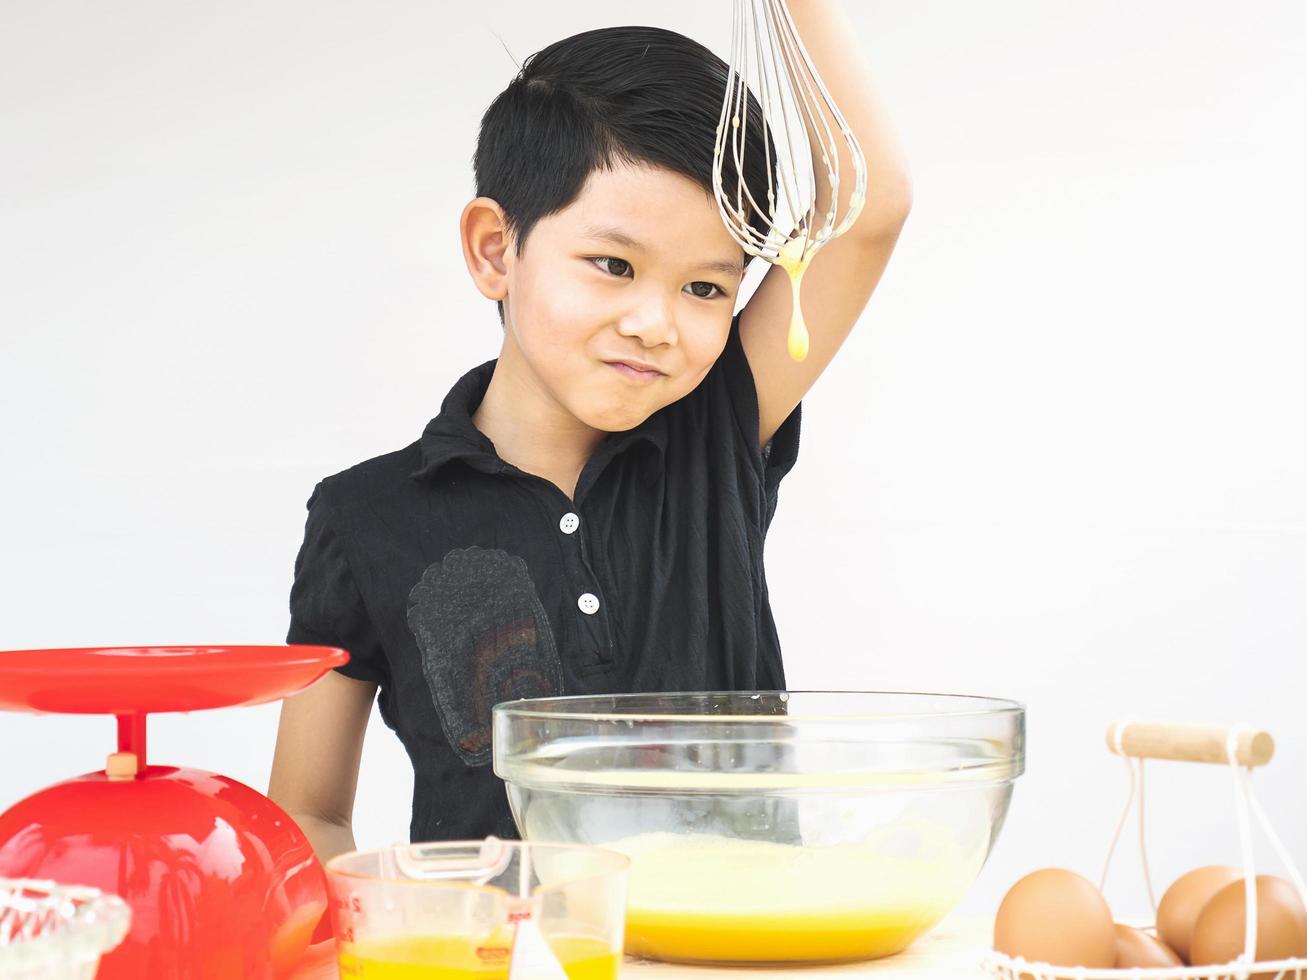 A boy is making cake. Photo is focused at his eyes.